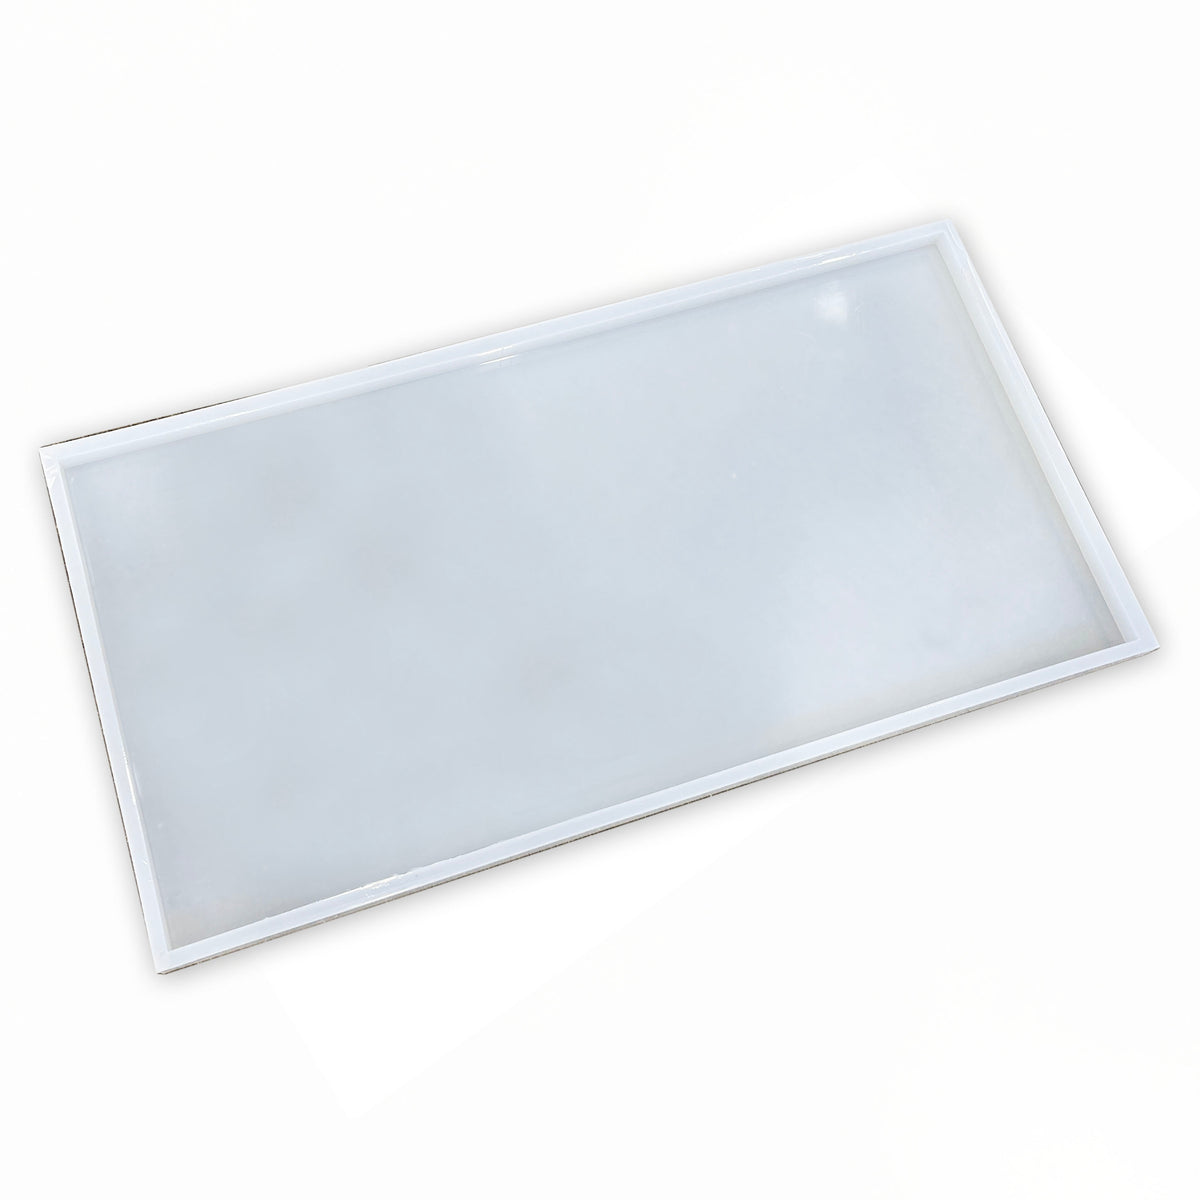 24 Inch Rectangle Reusable NO-SEAL Epoxy Resin Silicone Mold Tray Forms for  Makers Forming Table Epoxy Molds 